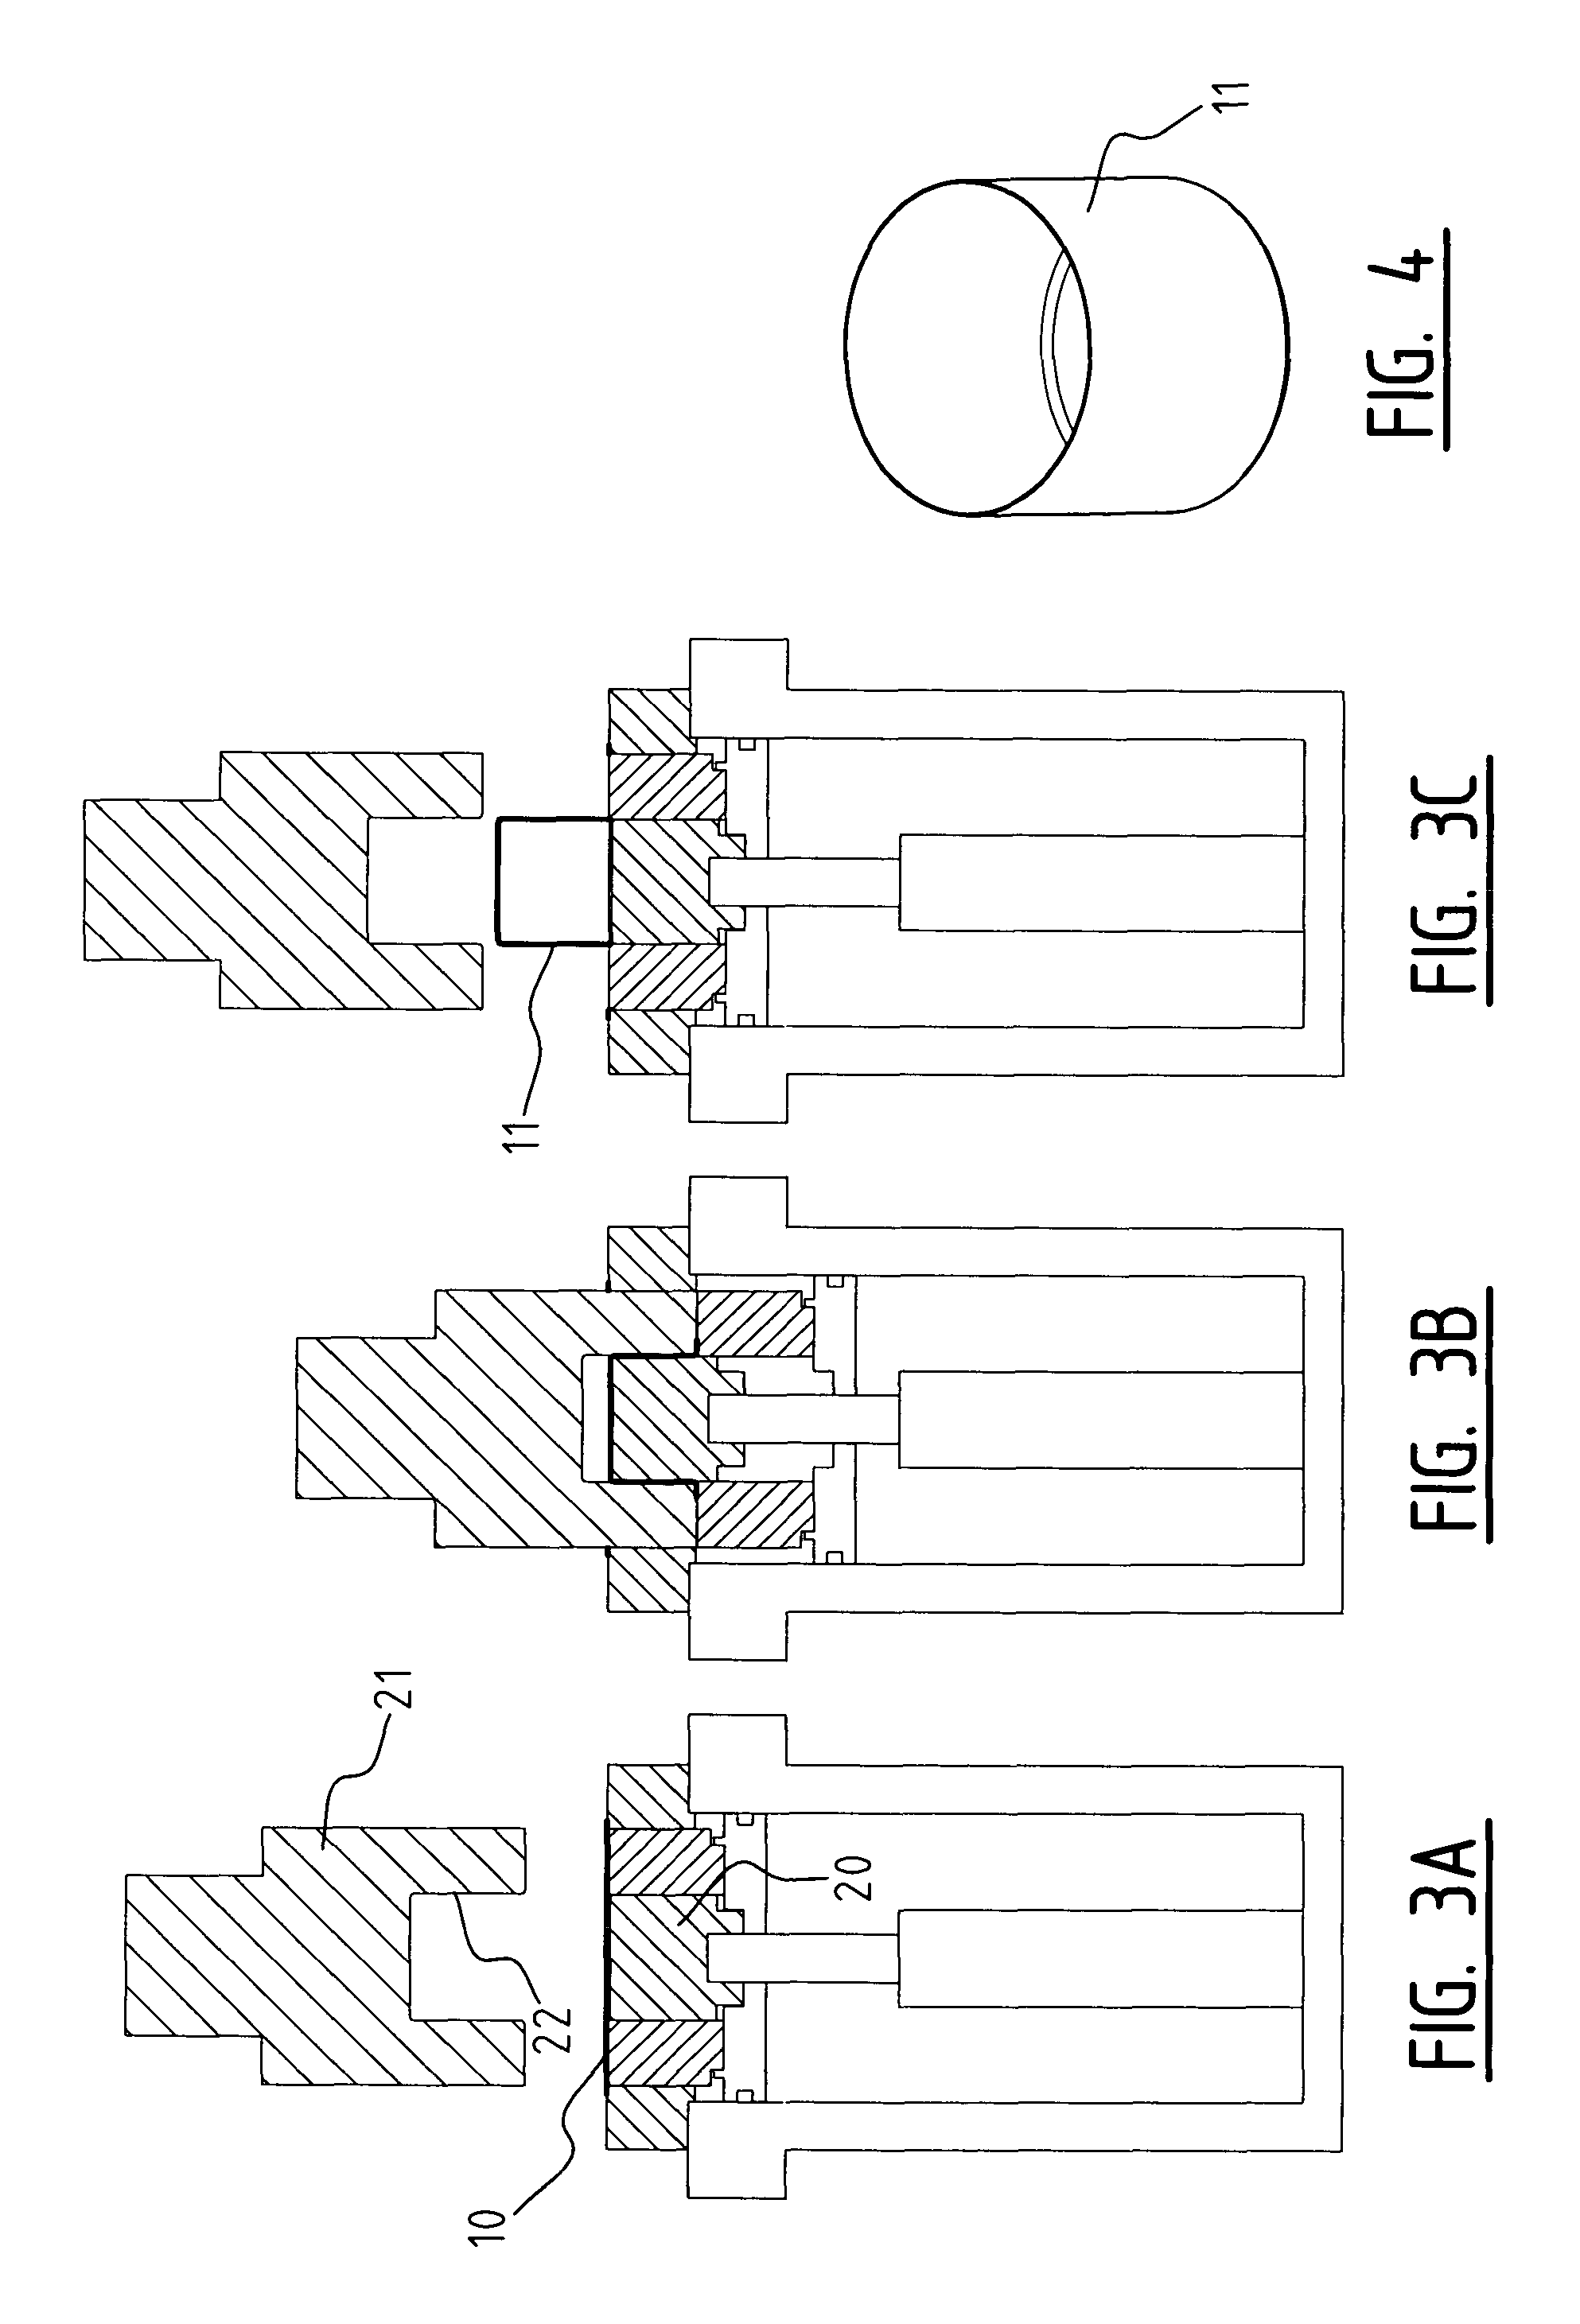 Method and apparatus for forming a steel pressure container, such steel pressure container and a preform therefor